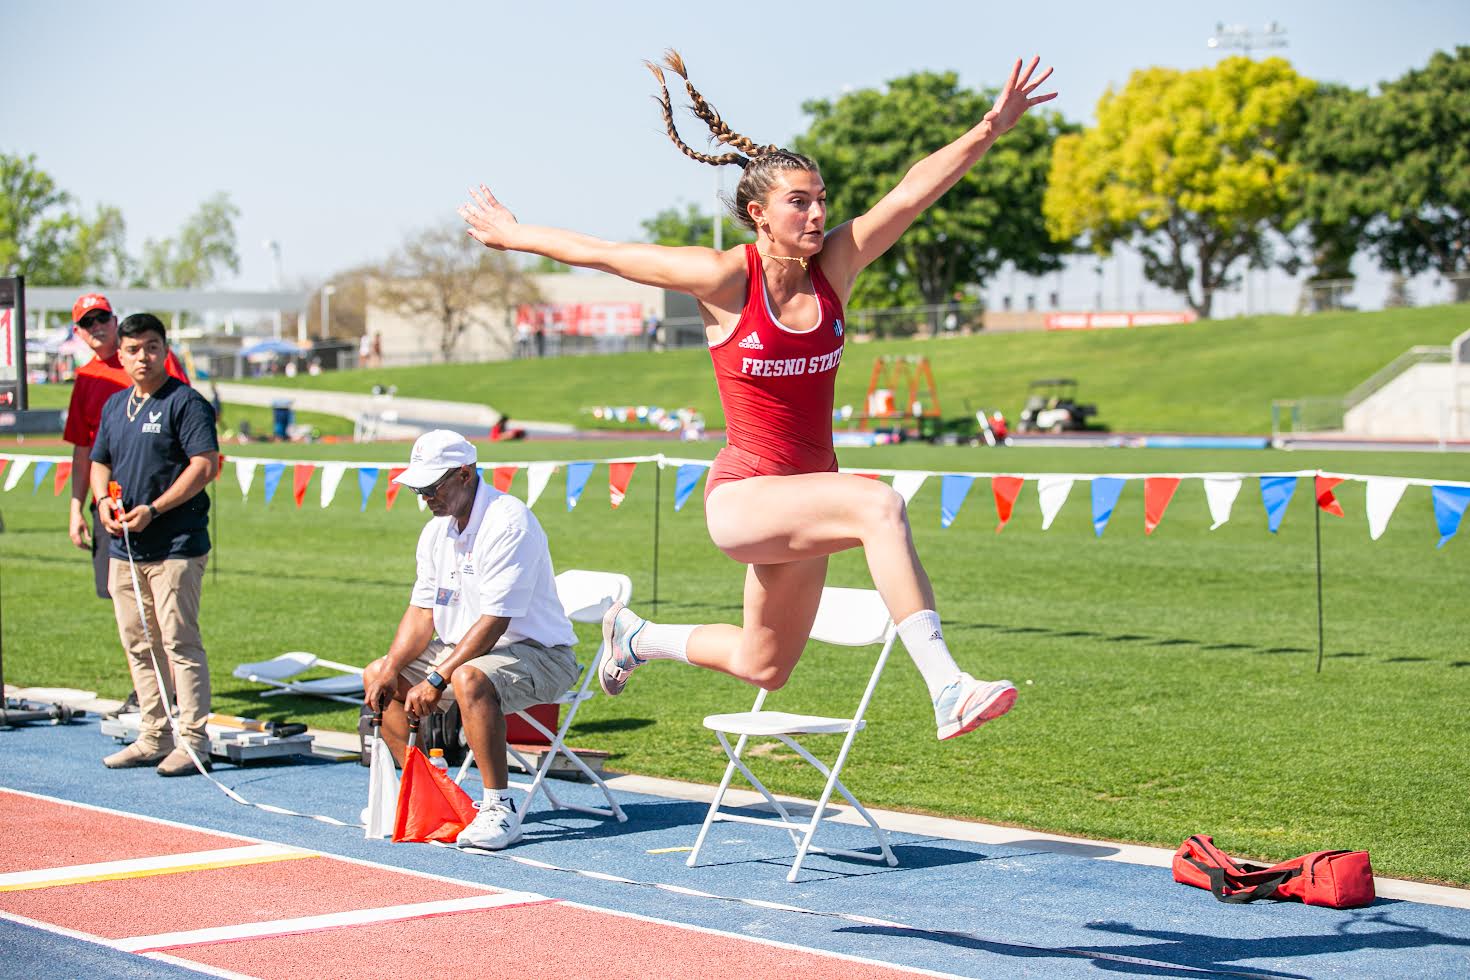 Rachela Pace set a new personal record in triple jump at the West Coast Relays April 1, 2022. (Photo courtesy of Fresno State Athletics)